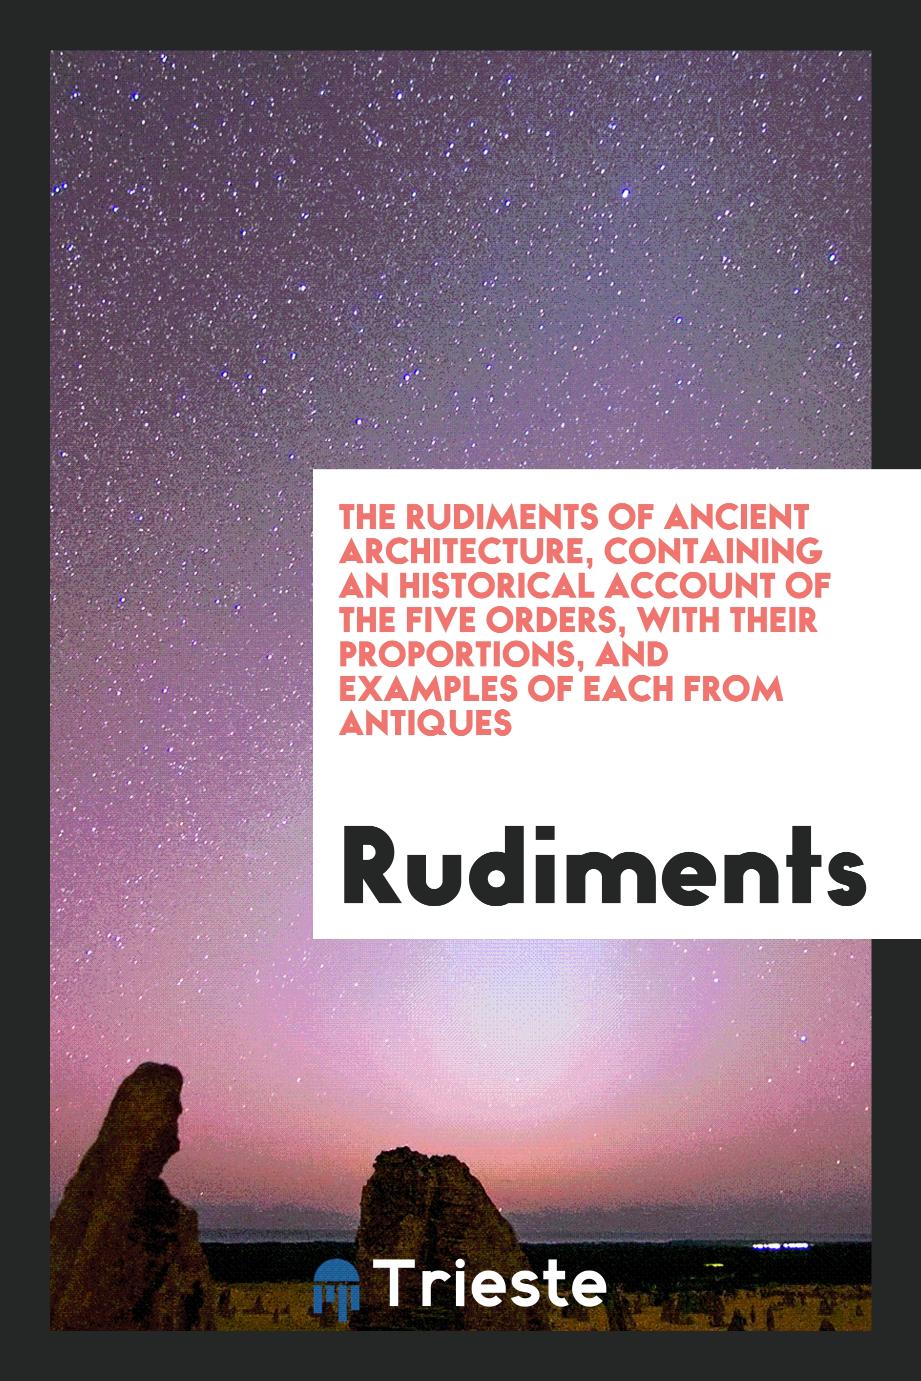 The Rudiments of Ancient Architecture, Containing an Historical Account of the Five Orders, with Their Proportions, and Examples of Each from Antiques